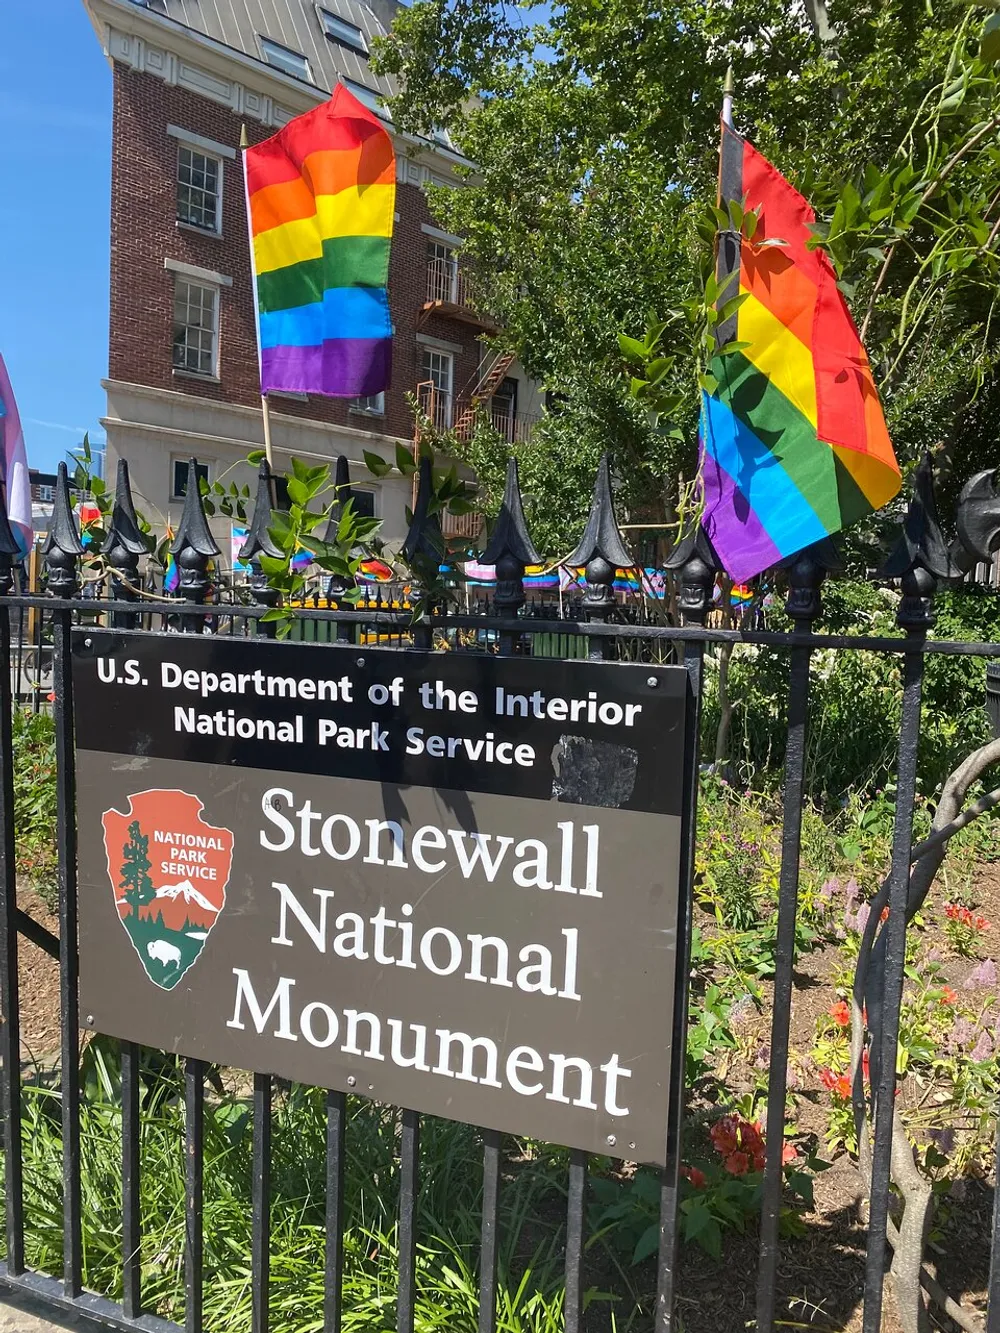 The image shows a sign for the Stonewall National Monument part of the US Department of the Interior National Park Service adorned with multiple rainbow pride flags fluttering in the foreground